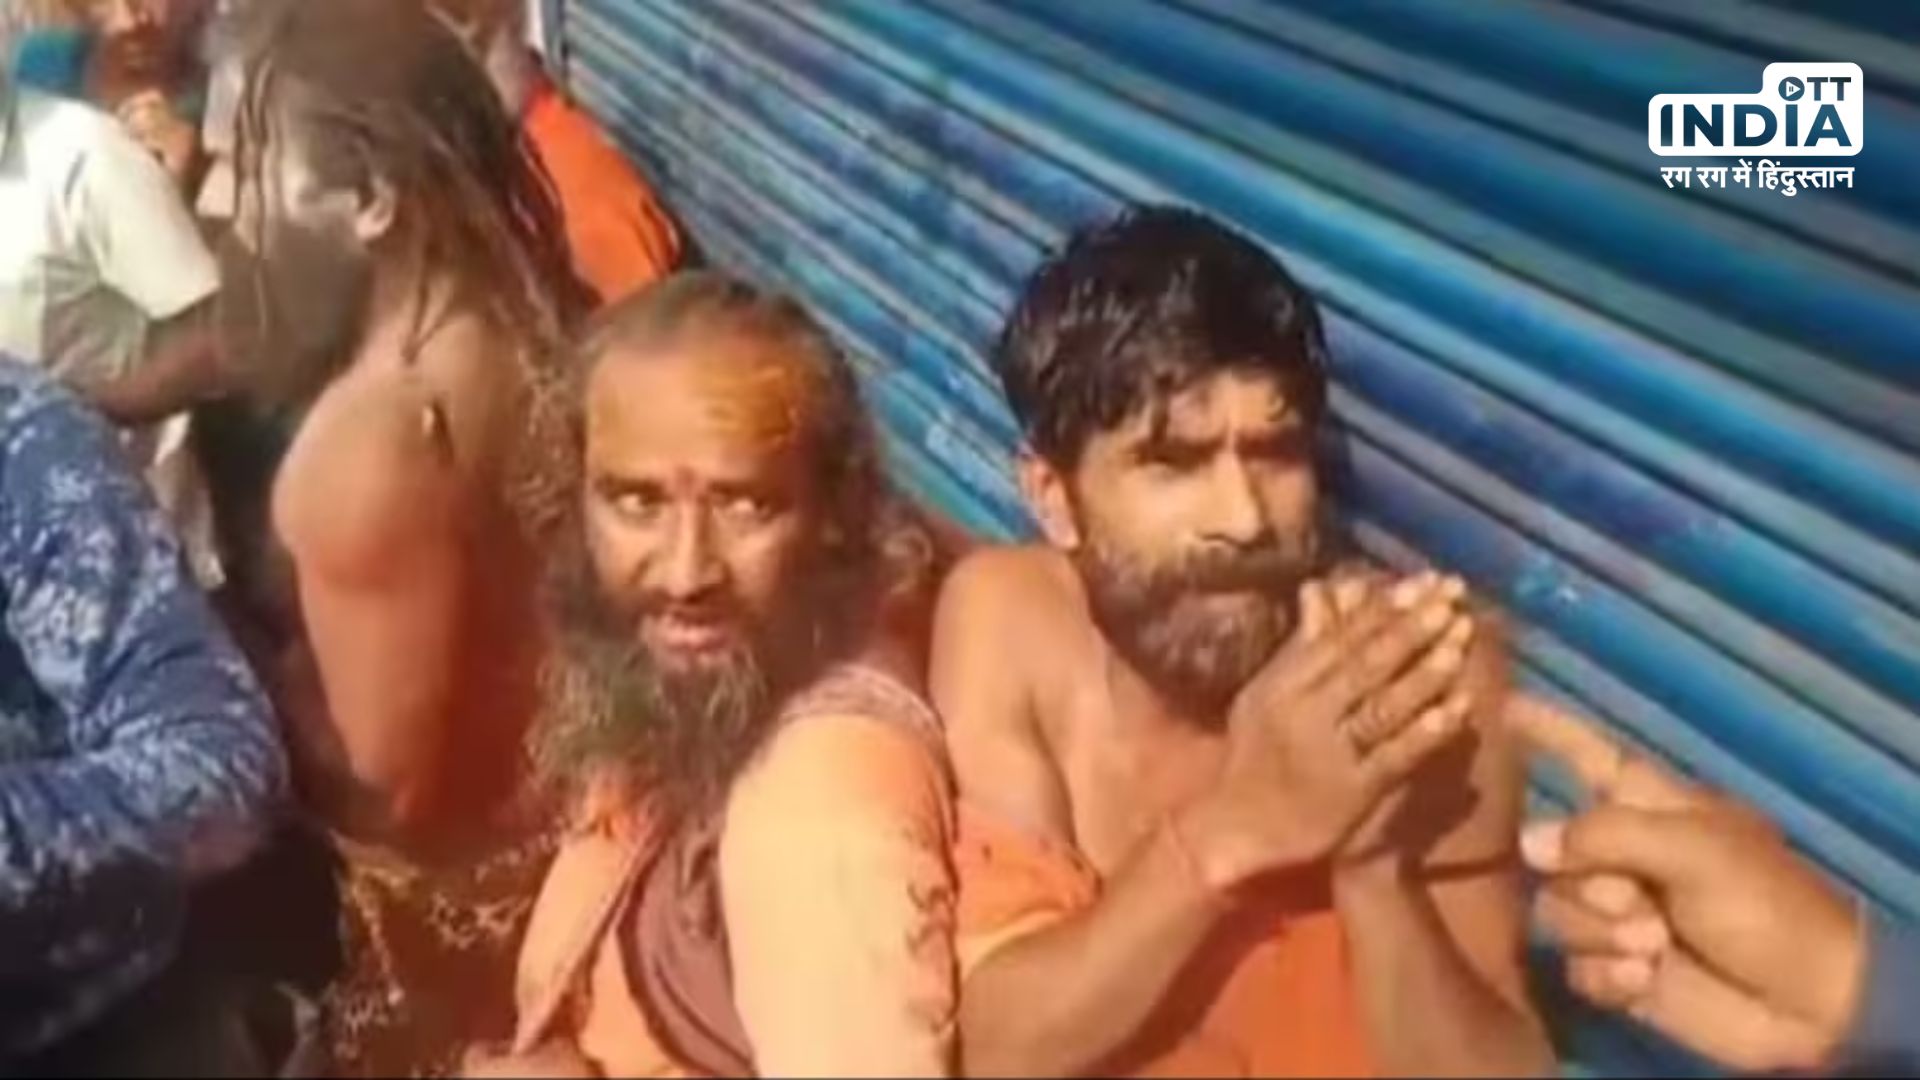 Sadhus assaulted by crowd in purulia west Bengal Case